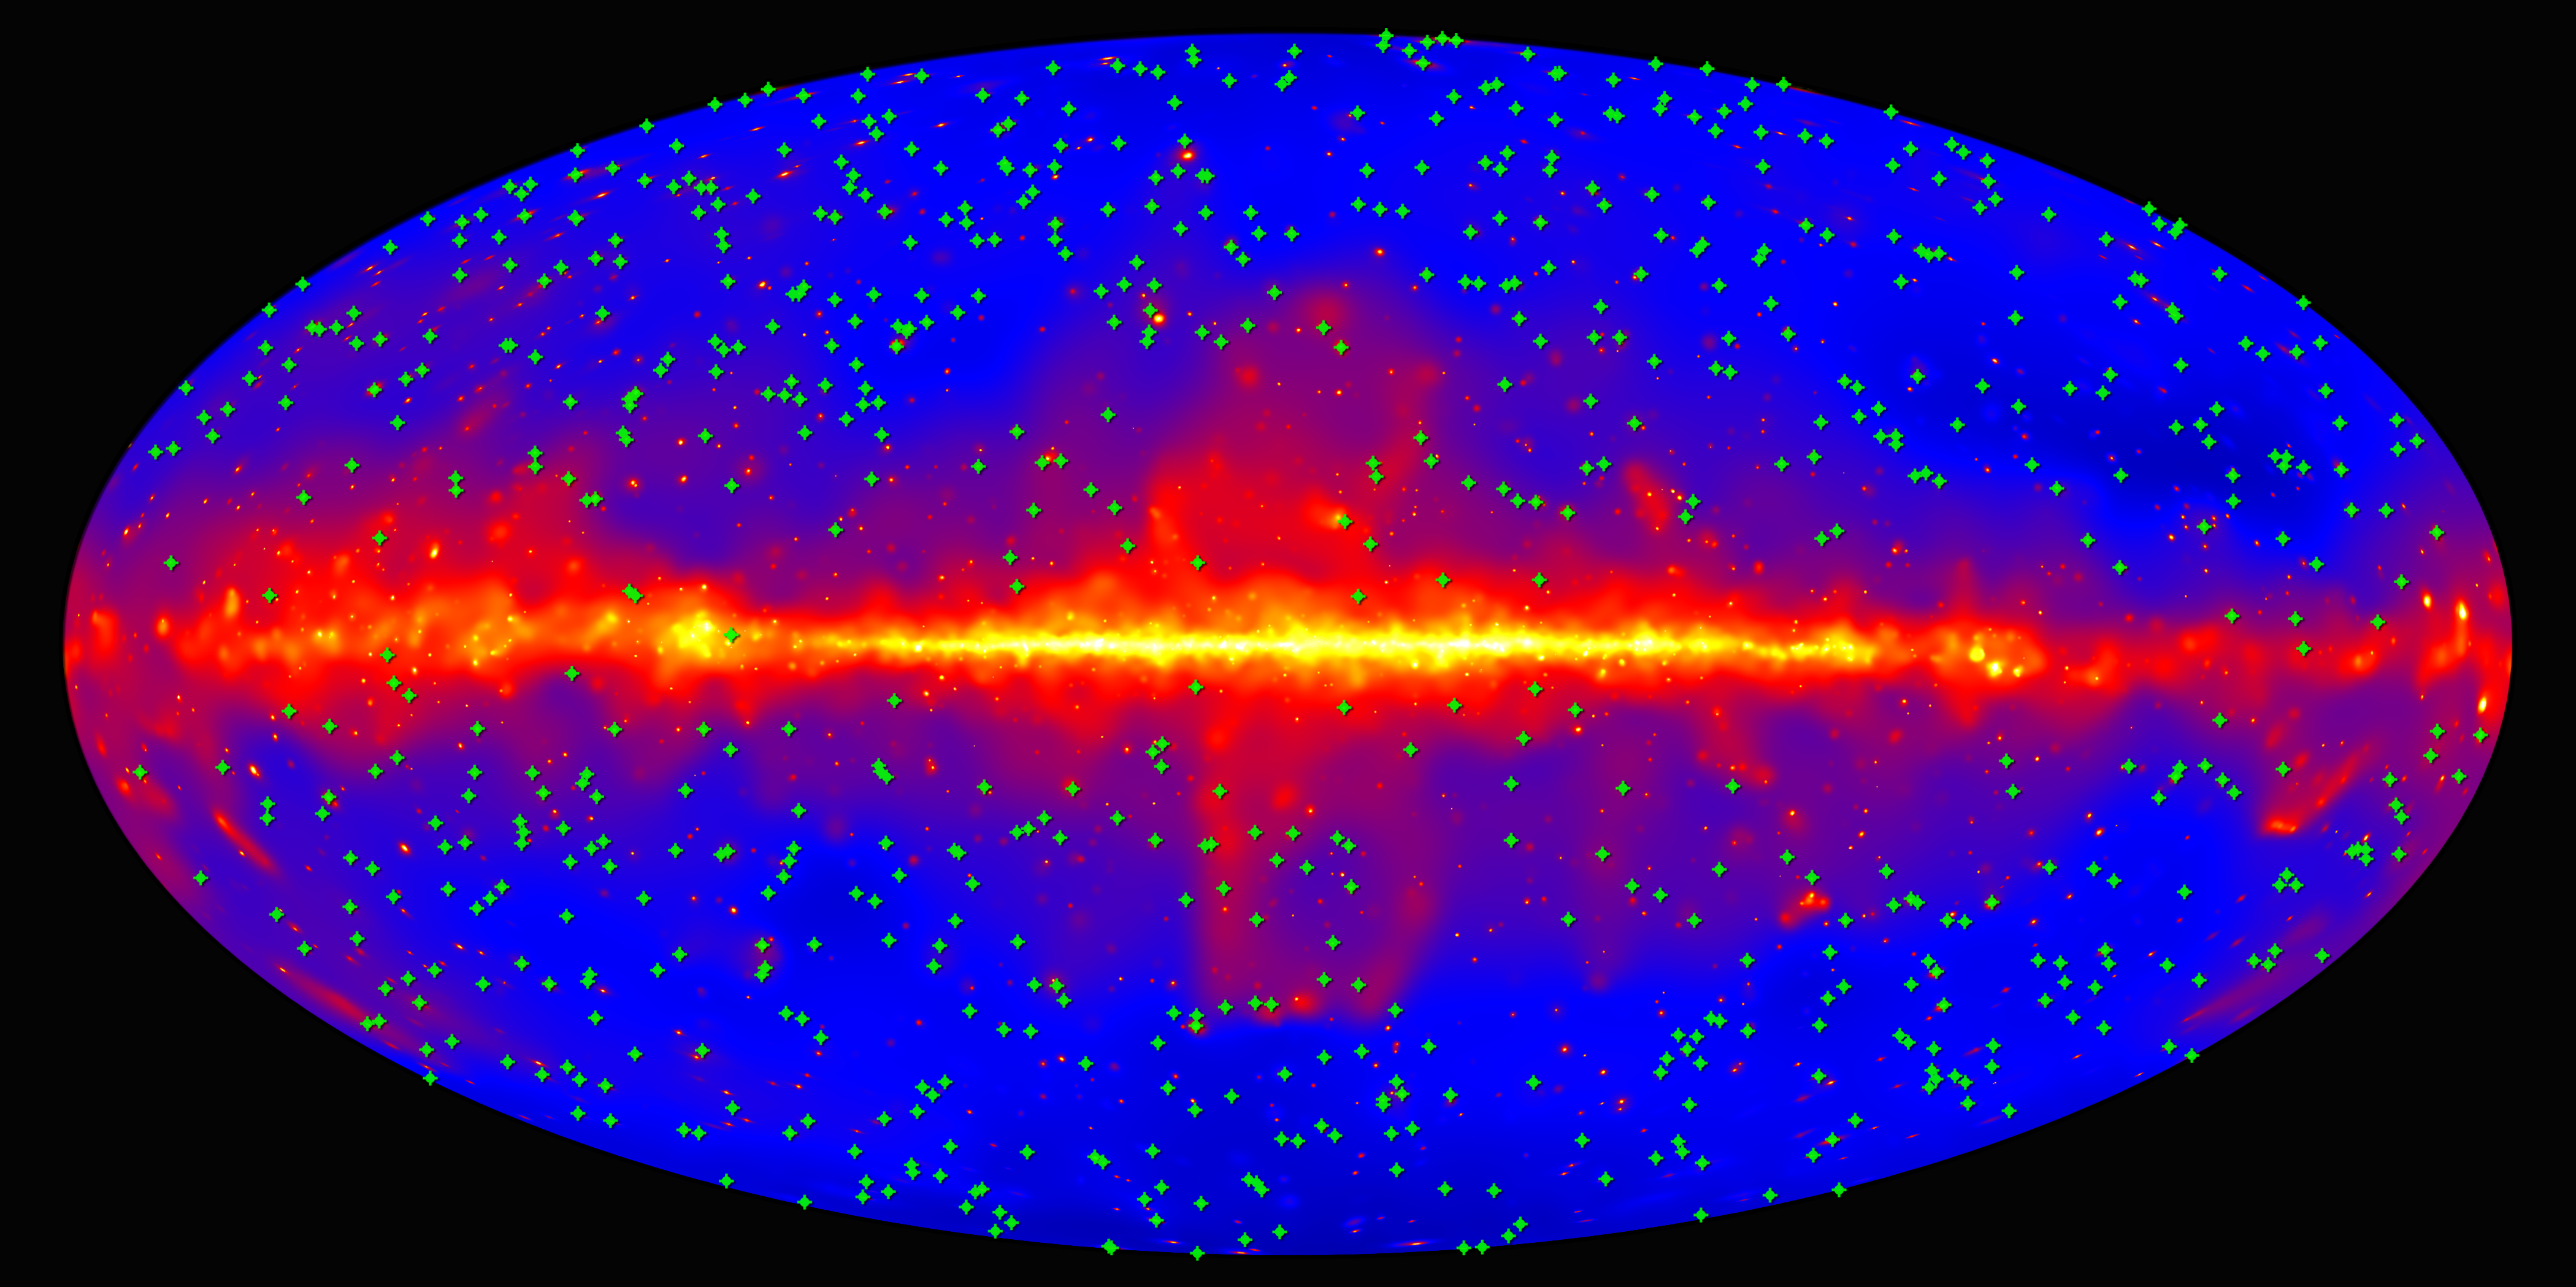 This map of the entire sky shows the location of 739 blazars used in the Fermi Gamma-ray Space Telescope’s measurement of the extragalactic background light. The background shows the sky as it appears in gamma rays with energies above 10 billion electron volts, constructed from nine years of observations by Fermi’s Large Area Telescope. The plane of our Milky Way galaxy runs along the middle of the plot.
Credit: NASA/DOE/Fermi LAT Collaboration
